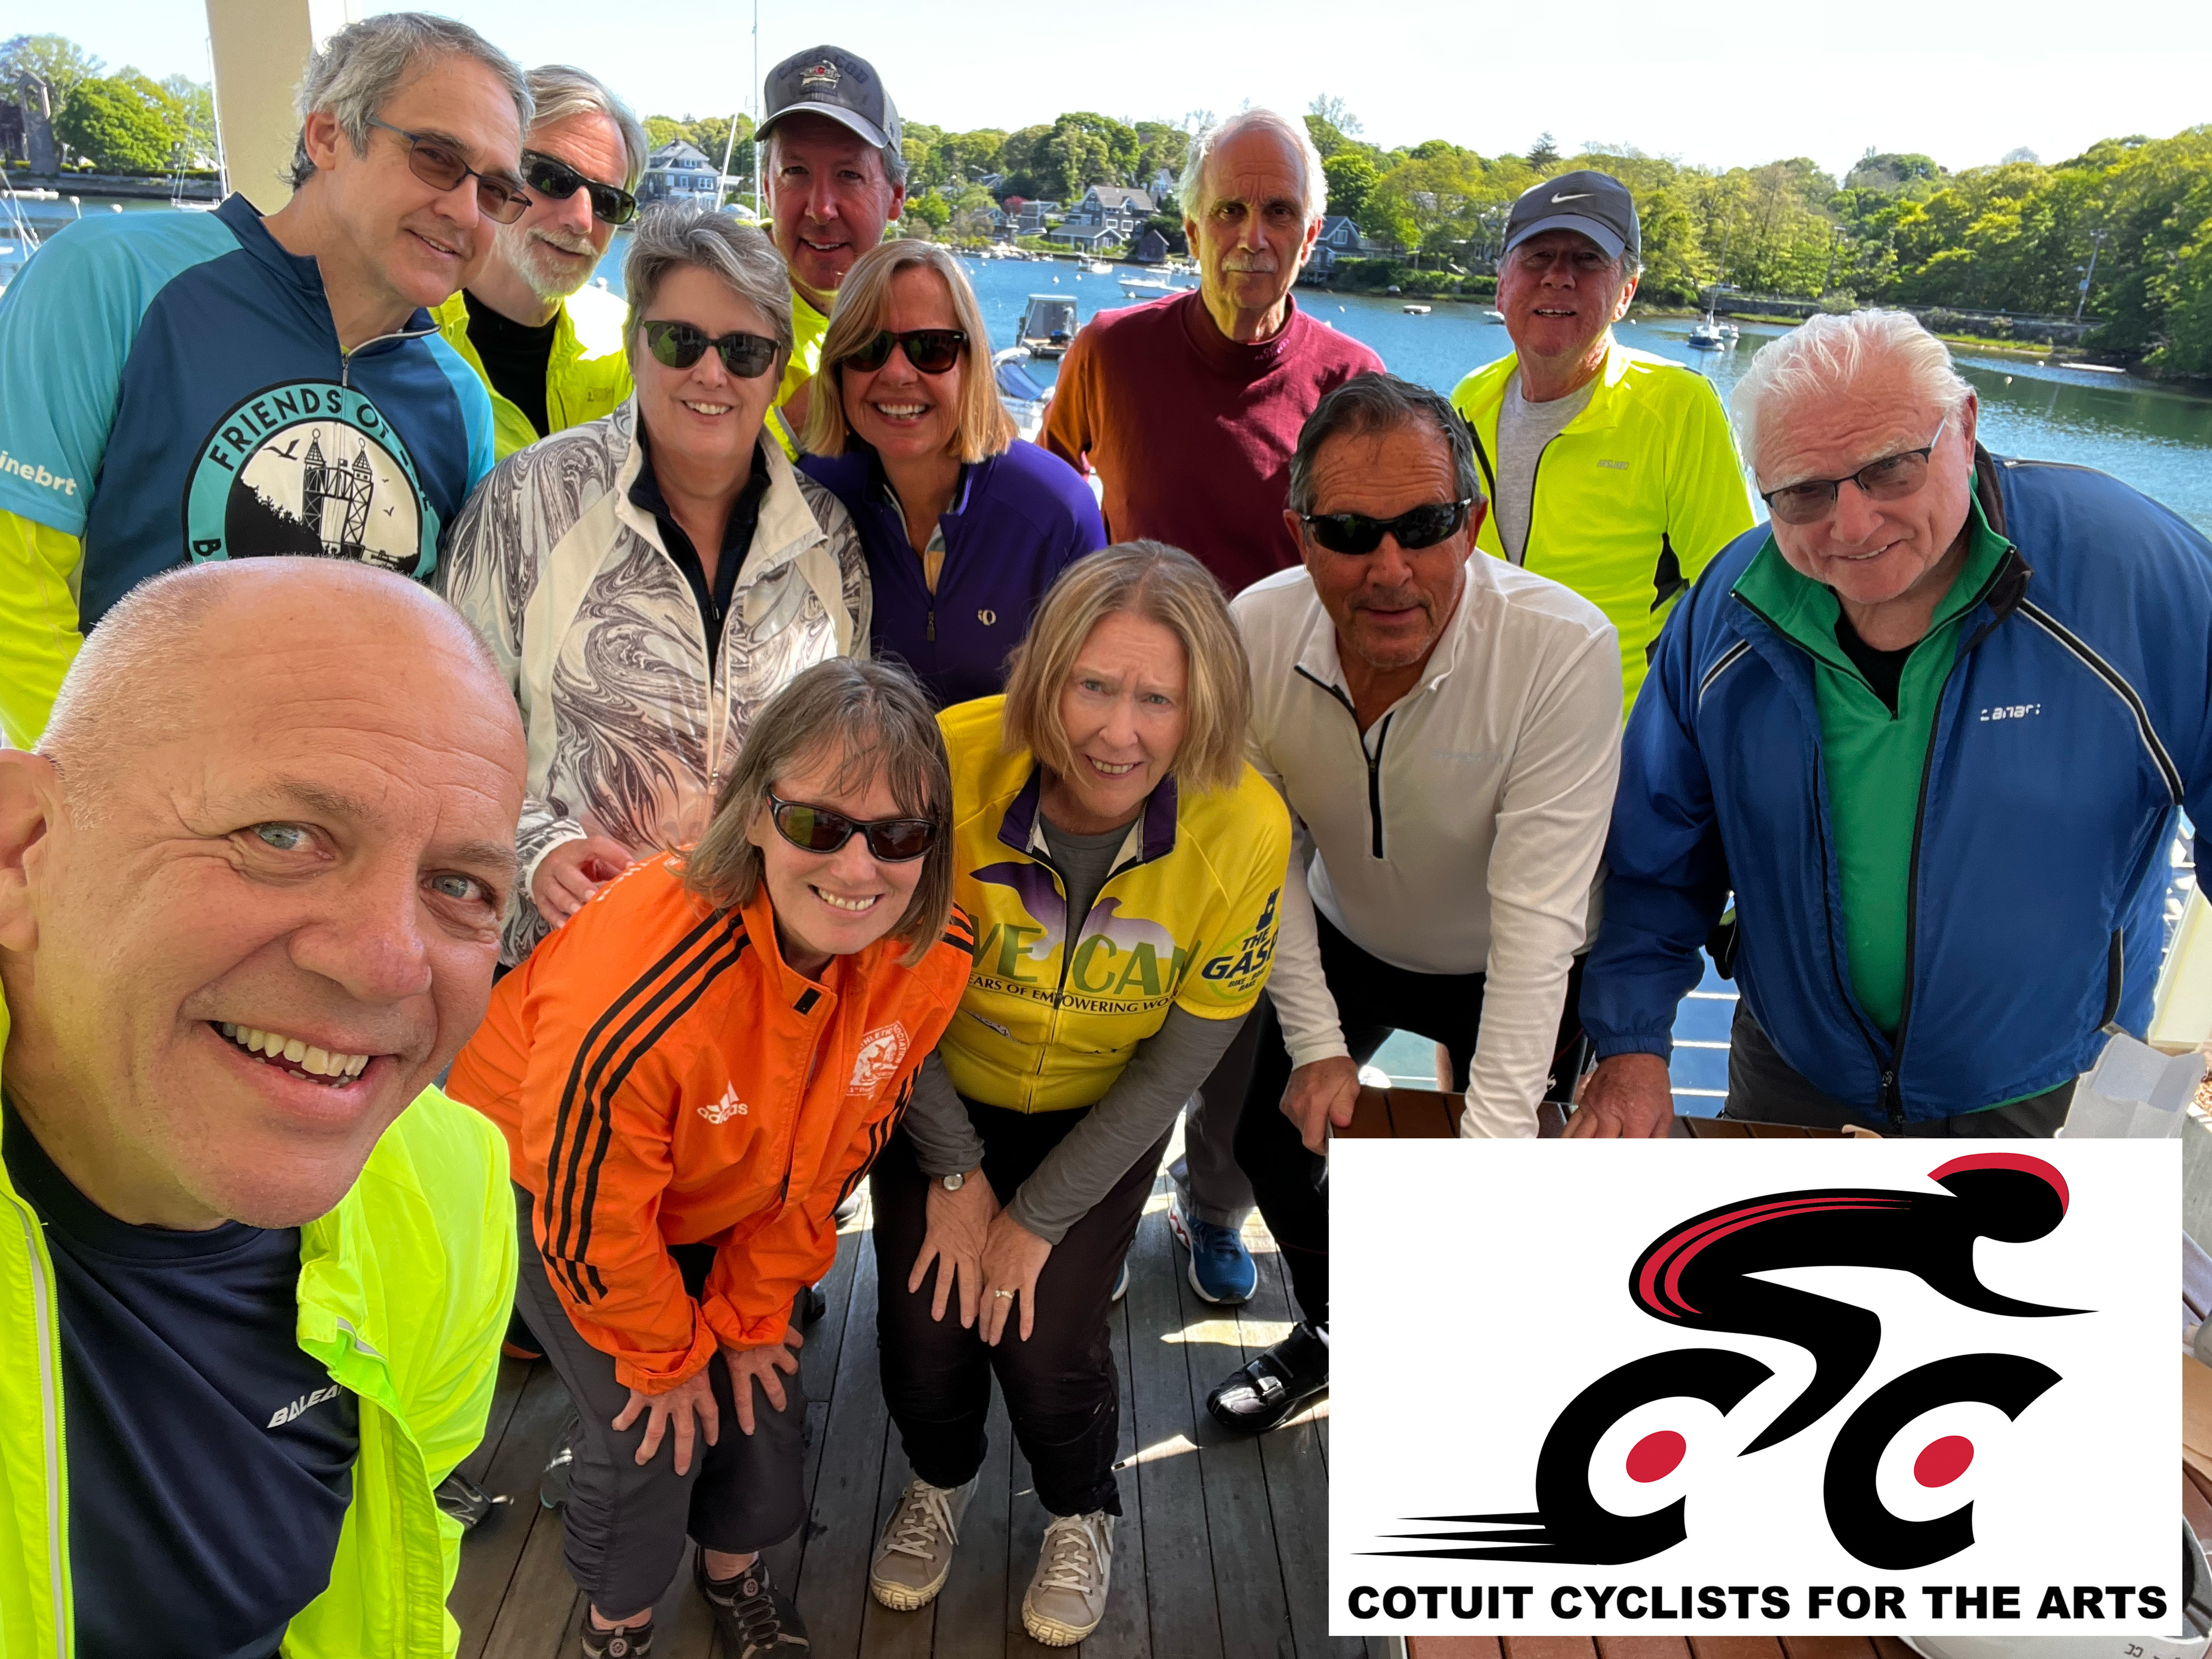 Cotuit Cyclists for the Arts